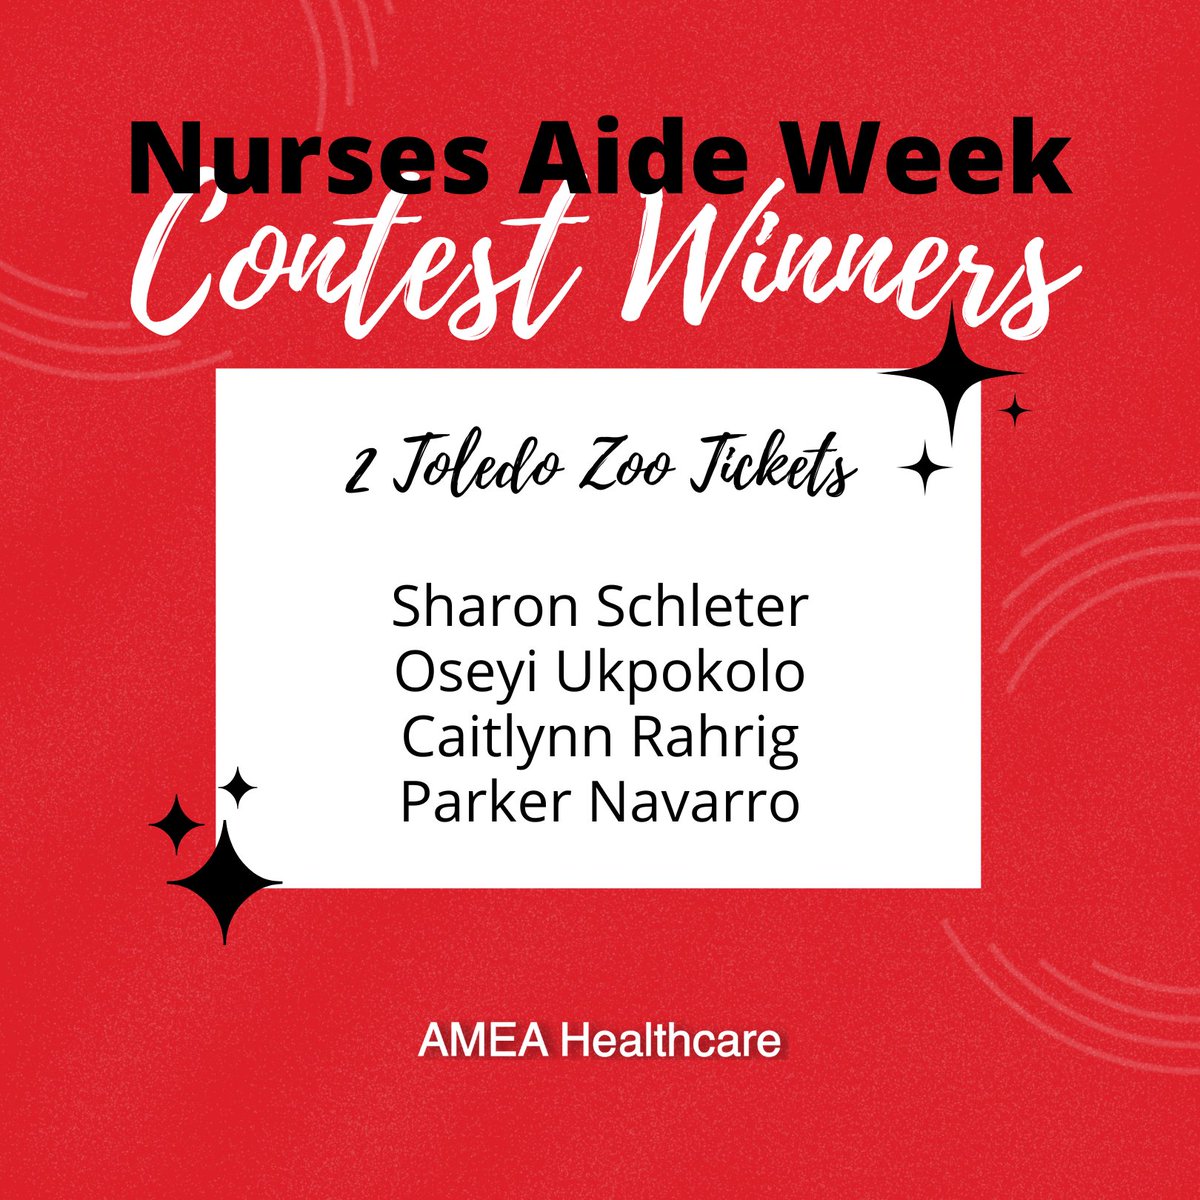 In celebration of National Nurses Aide Week, June 15-21, we are giving away prizes! The winners of our next drawing are Sharon Schleter, Oseyi Ukpokolo, Caitlynn Rahrig, and Parker Navarro!

Congratulations!

#NationalNursesAideWeek #Giveaway #AMEAHealthcare #HealthcareStaffing